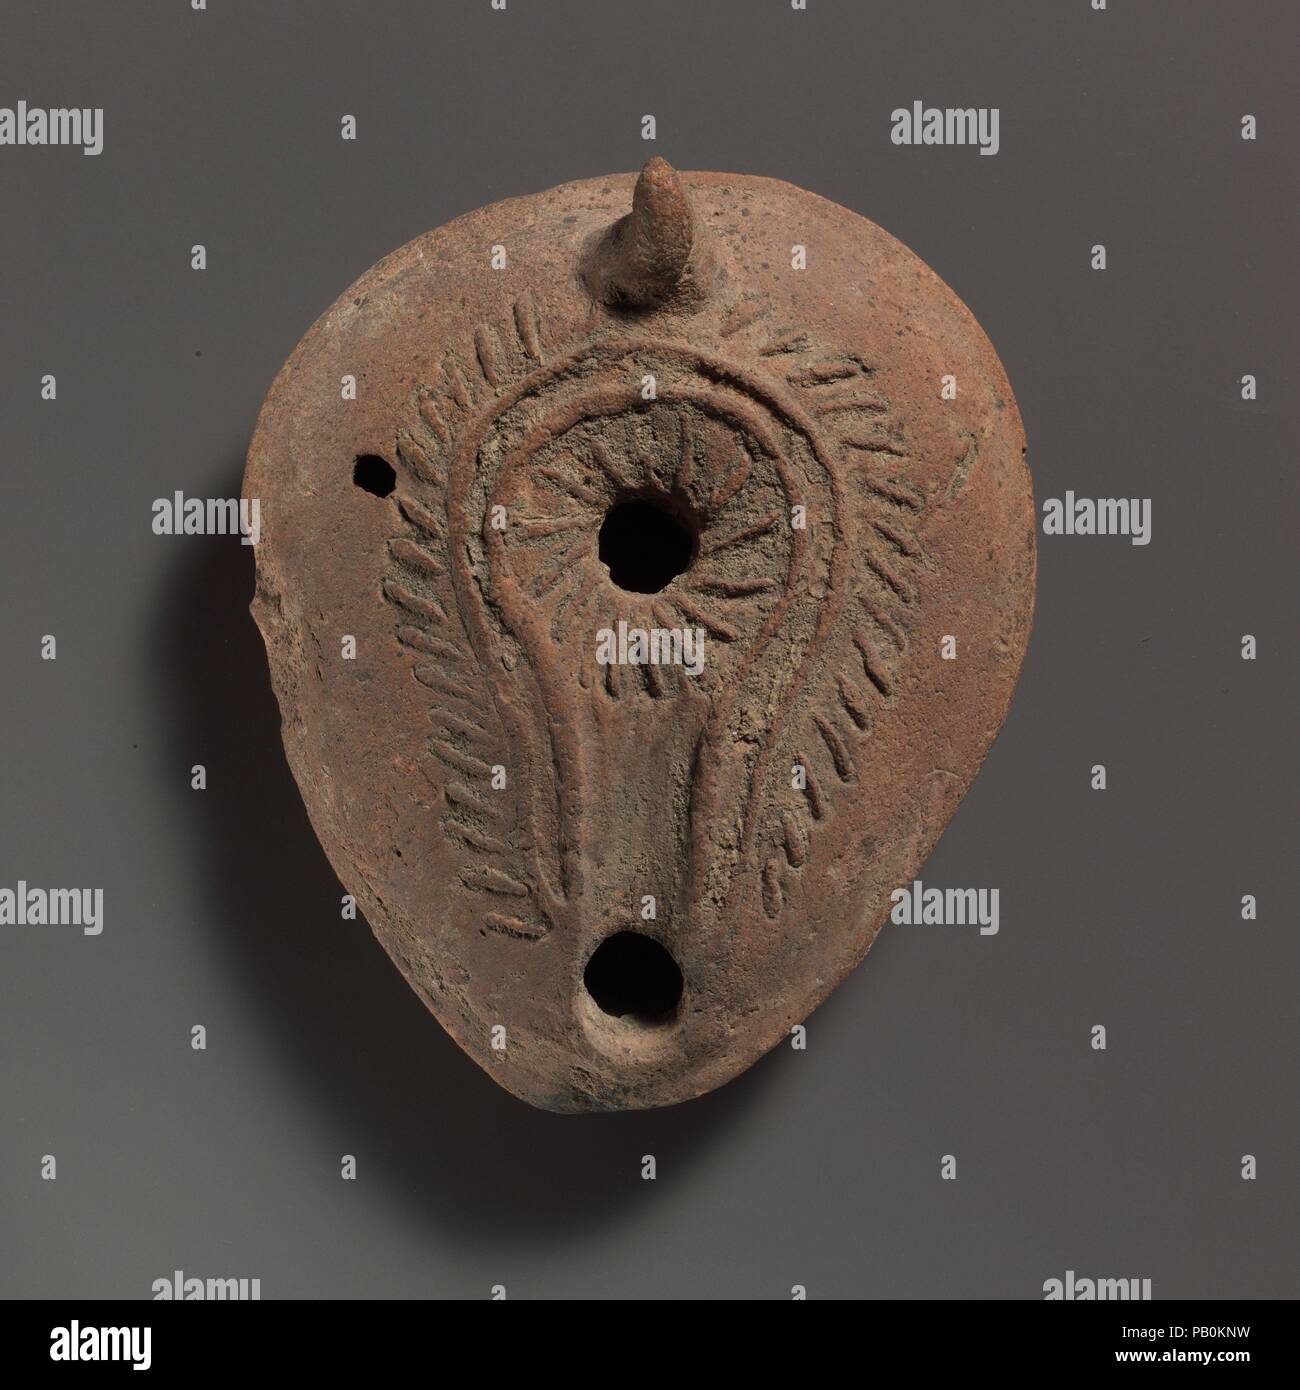 Terracotta oil lamp. Culture: Roman. Dimensions: Overall: 1 1/2 x 3 5/8 in. (3.8 x 9.2 cm). Date: 7th century A.D..  Mold-made, with applied handle. Discus: 'Catherine wheel' lines radiating from a single central filling hole, surrounded by a double ridge; the inner ridge continuing forward around the wick hole, forming a shallow channel. On the broad, sloping shoulder, slanting strokes round discus and nozzle channel. Small, solid lug handle, slightly hooked at rear. sharply carinated body. Circular hollow on base; linear ridge from base to underside of nozzle.  Intact, except for small hole  Stock Photo